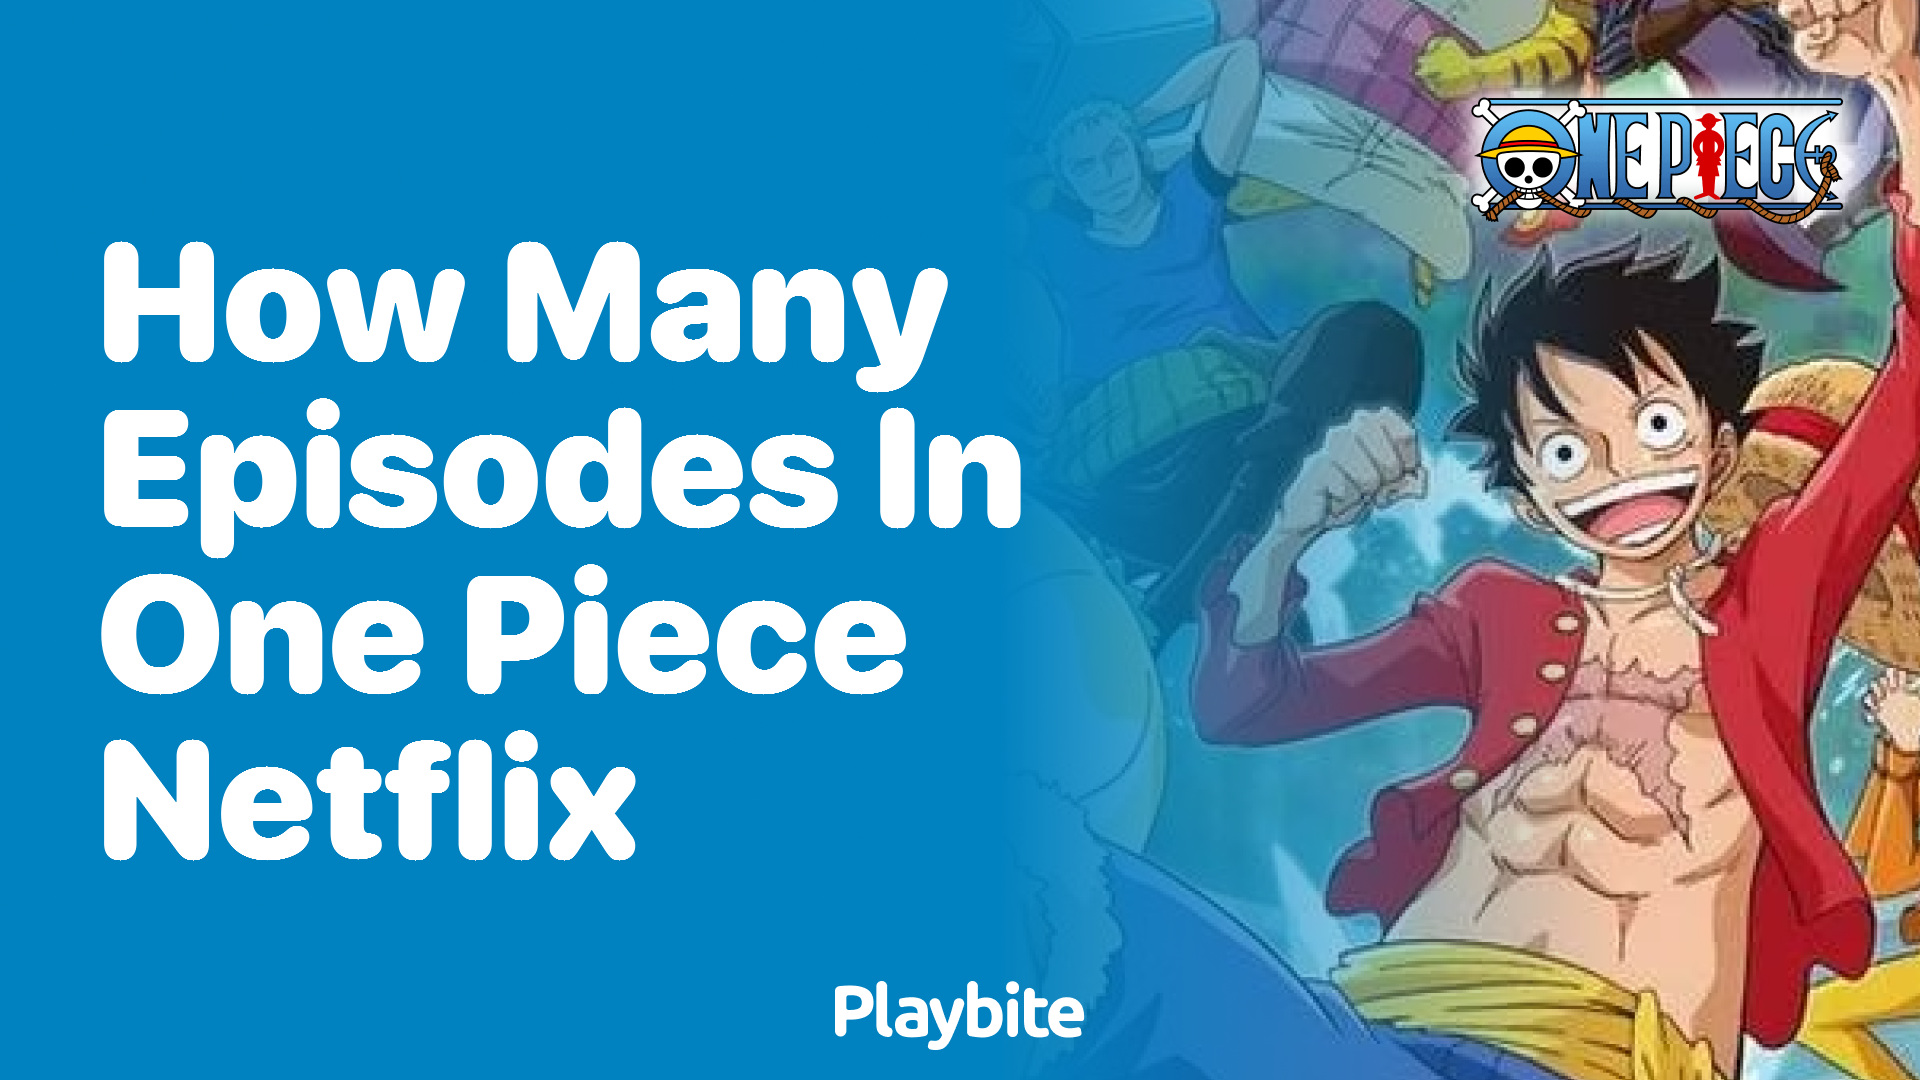 How Many Episodes Are in One Piece on Netflix? Playbite